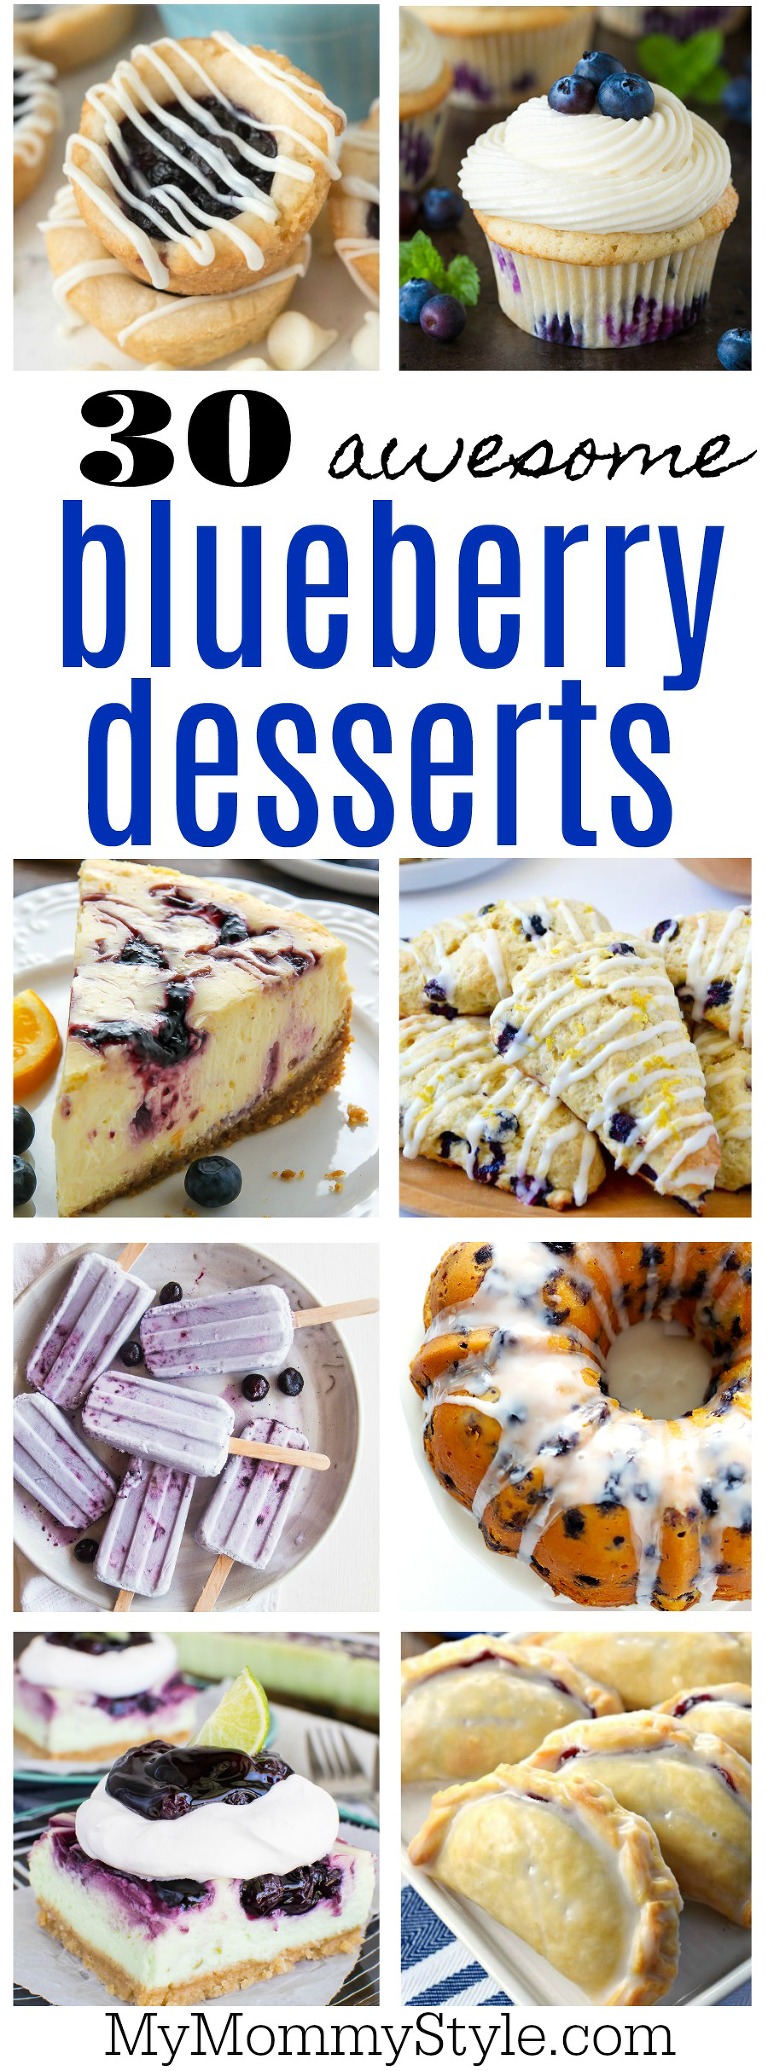 30 awesome blueberry desserts